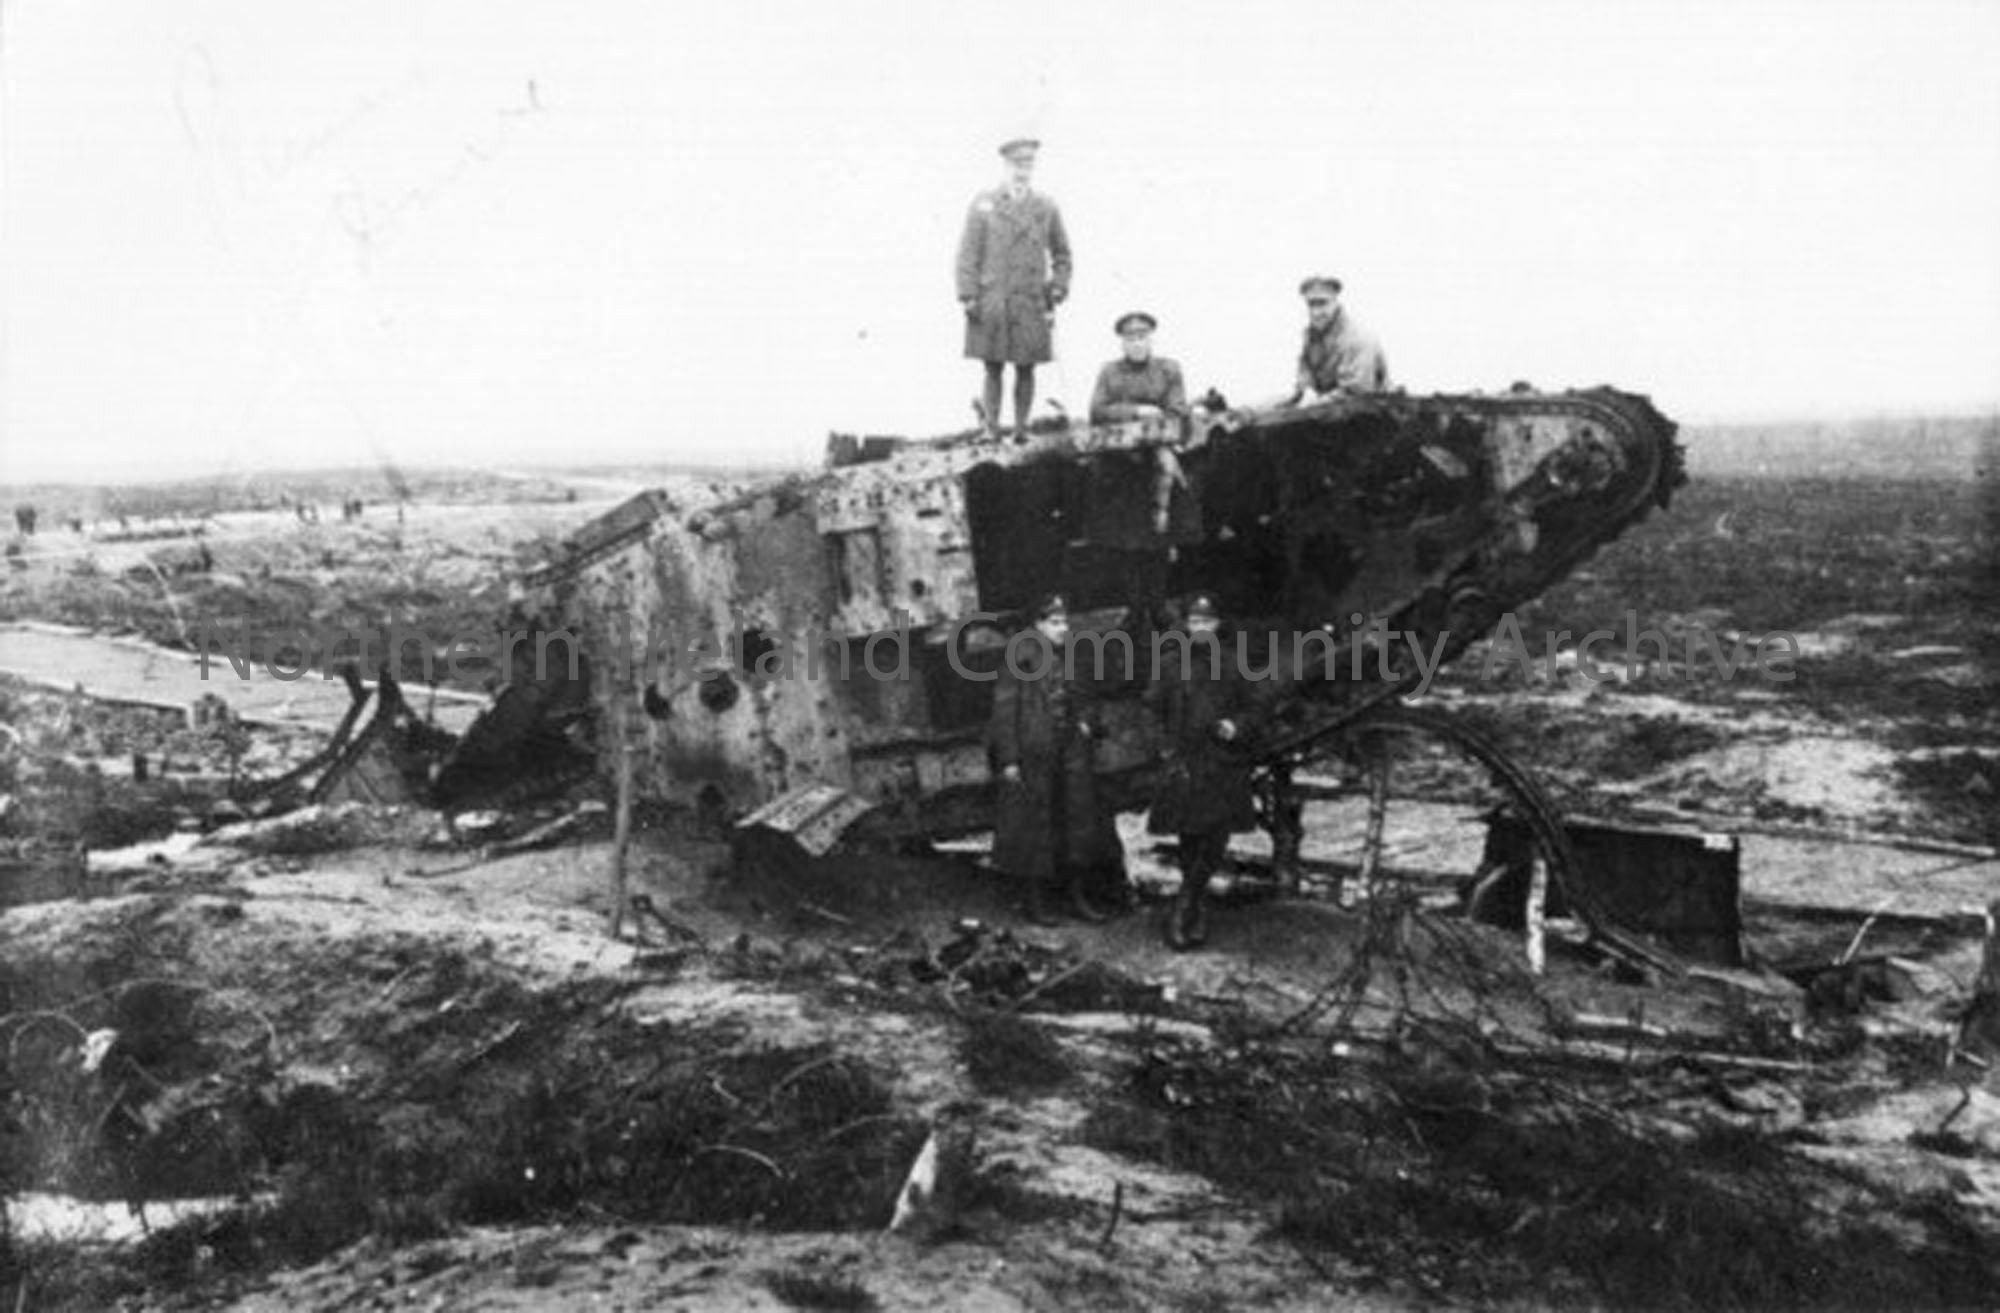 Major Robb’s colleagues examining the hulk of a British tank, again on the Ypres to Menin Road. Included are doctors Picken, Wright and Davidson. Thes…